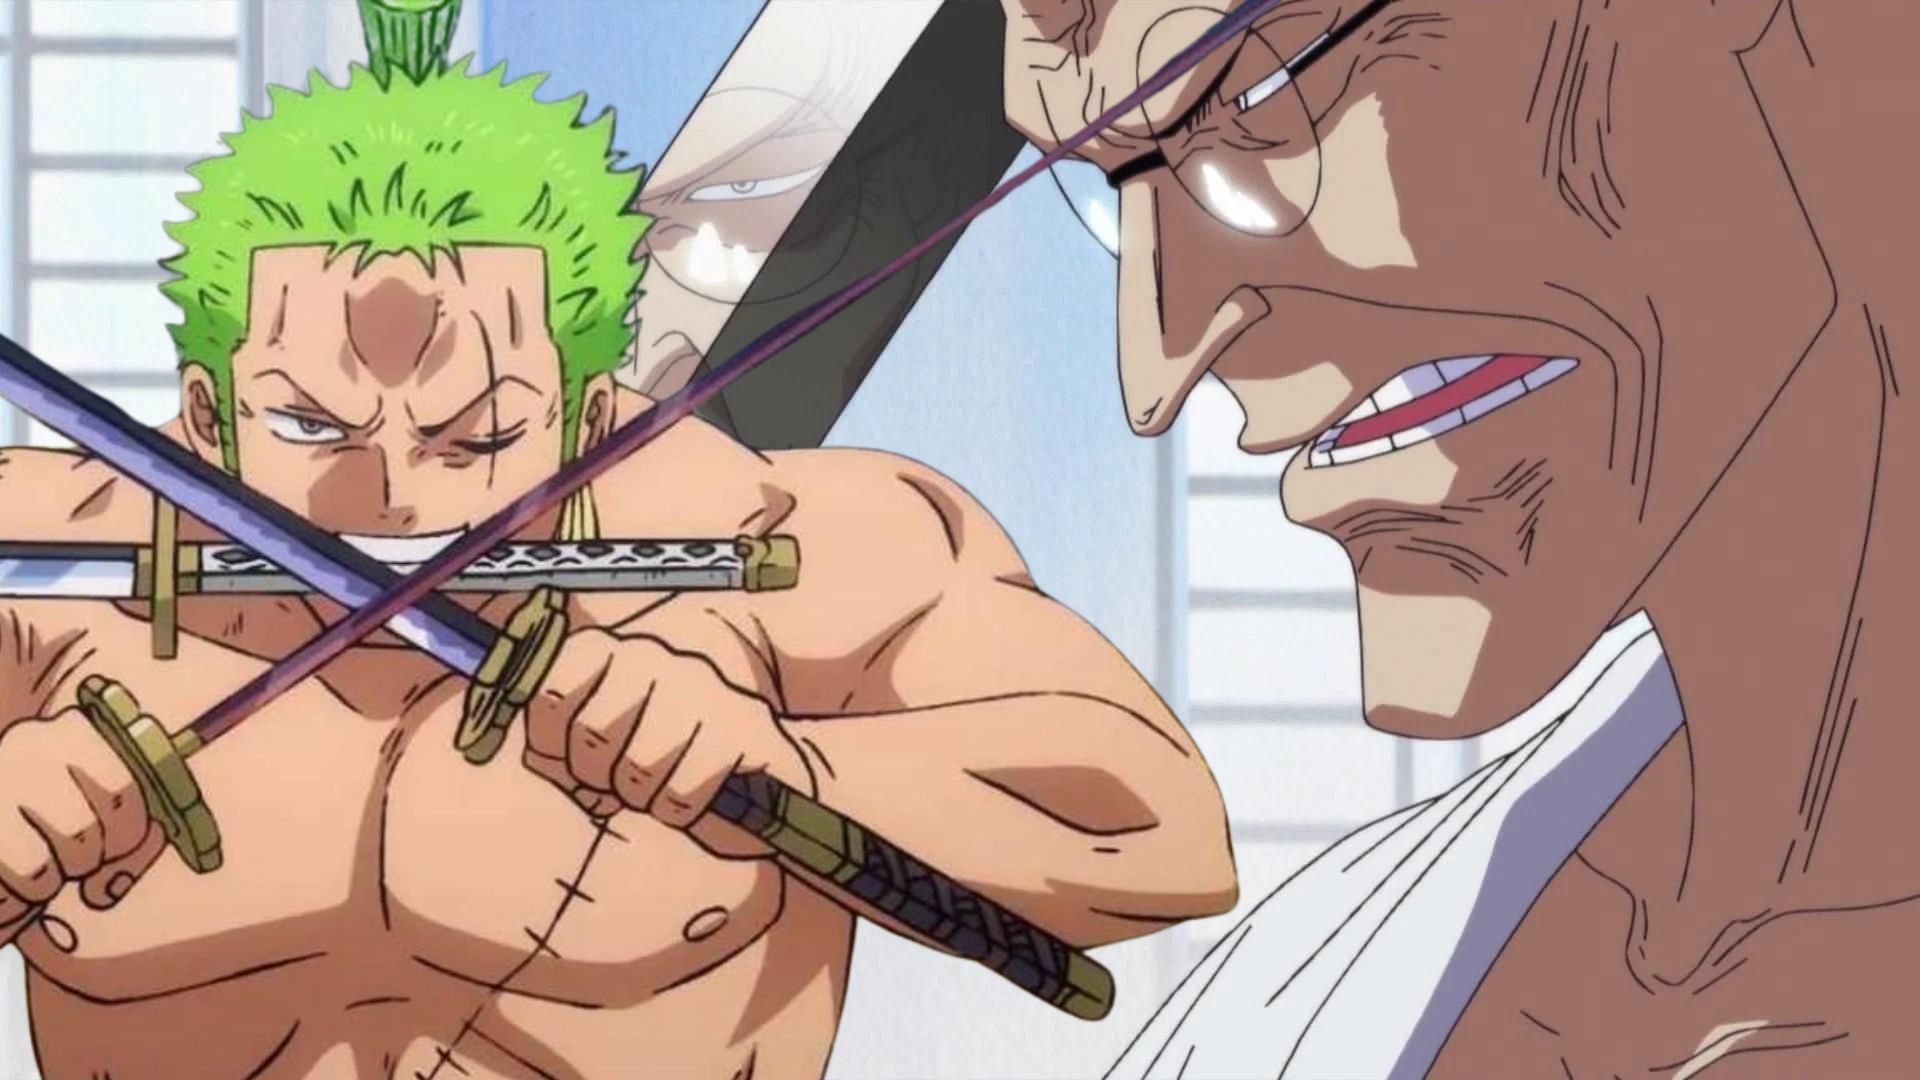 Zoro ready to fight with all his three swords with a background of Nusjuro looking over Zoro